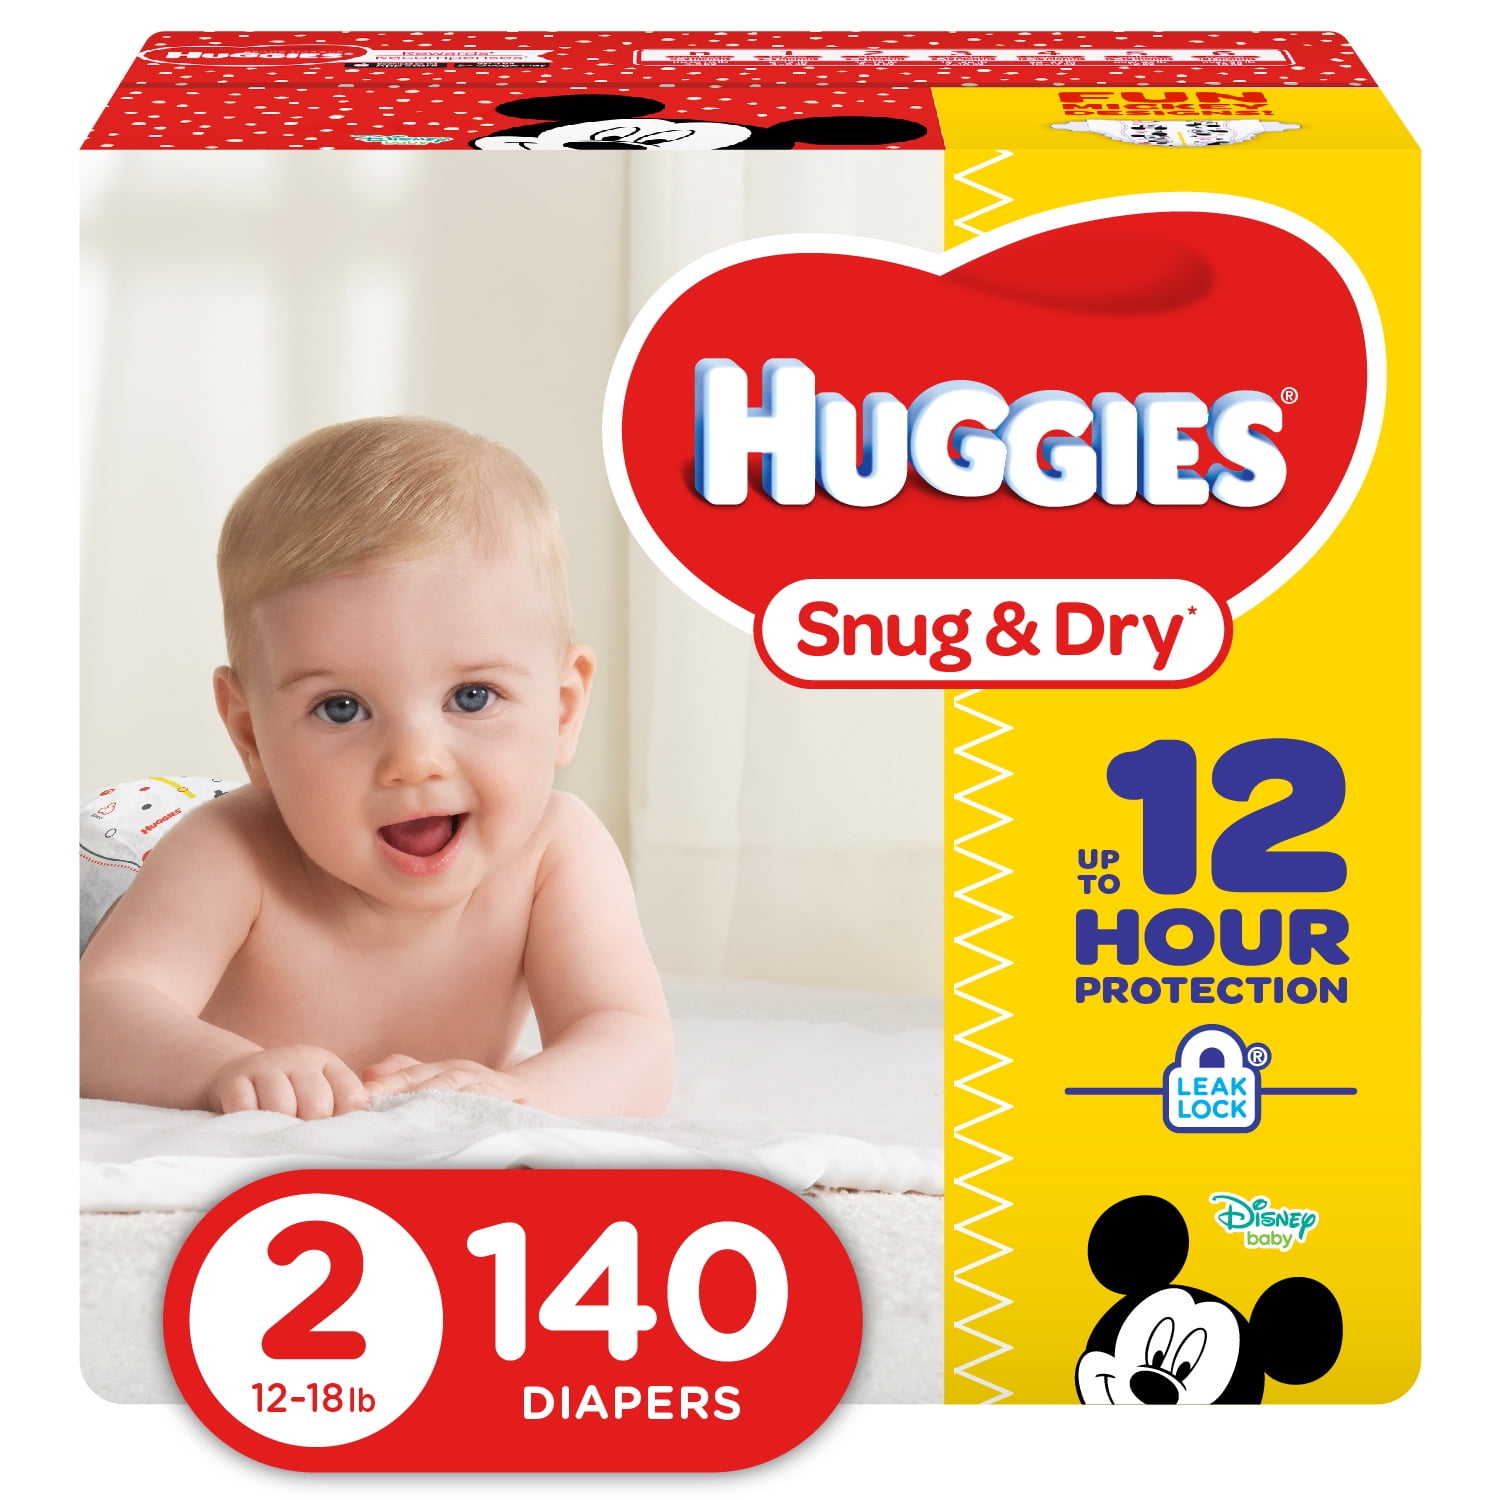 Size 2 228 Count ONE Month Supply fits 12-18 lb. Huggies Snug & Dry Baby Diapers Packaging May Vary